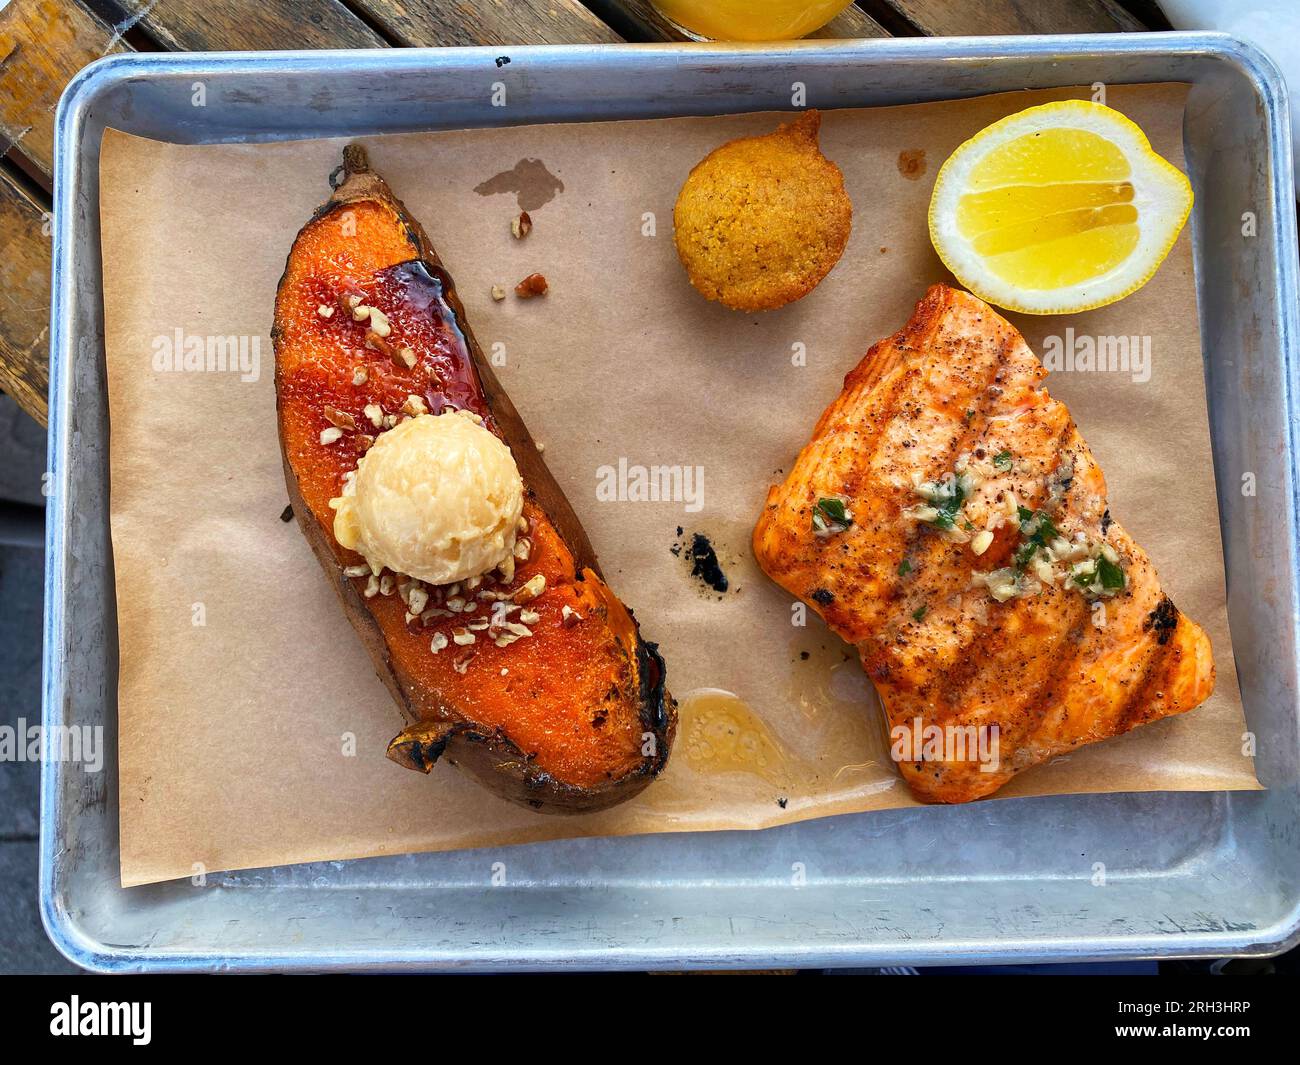 Top-down view of salmon and sweet potato on metal cafeteria tray Stock Photo